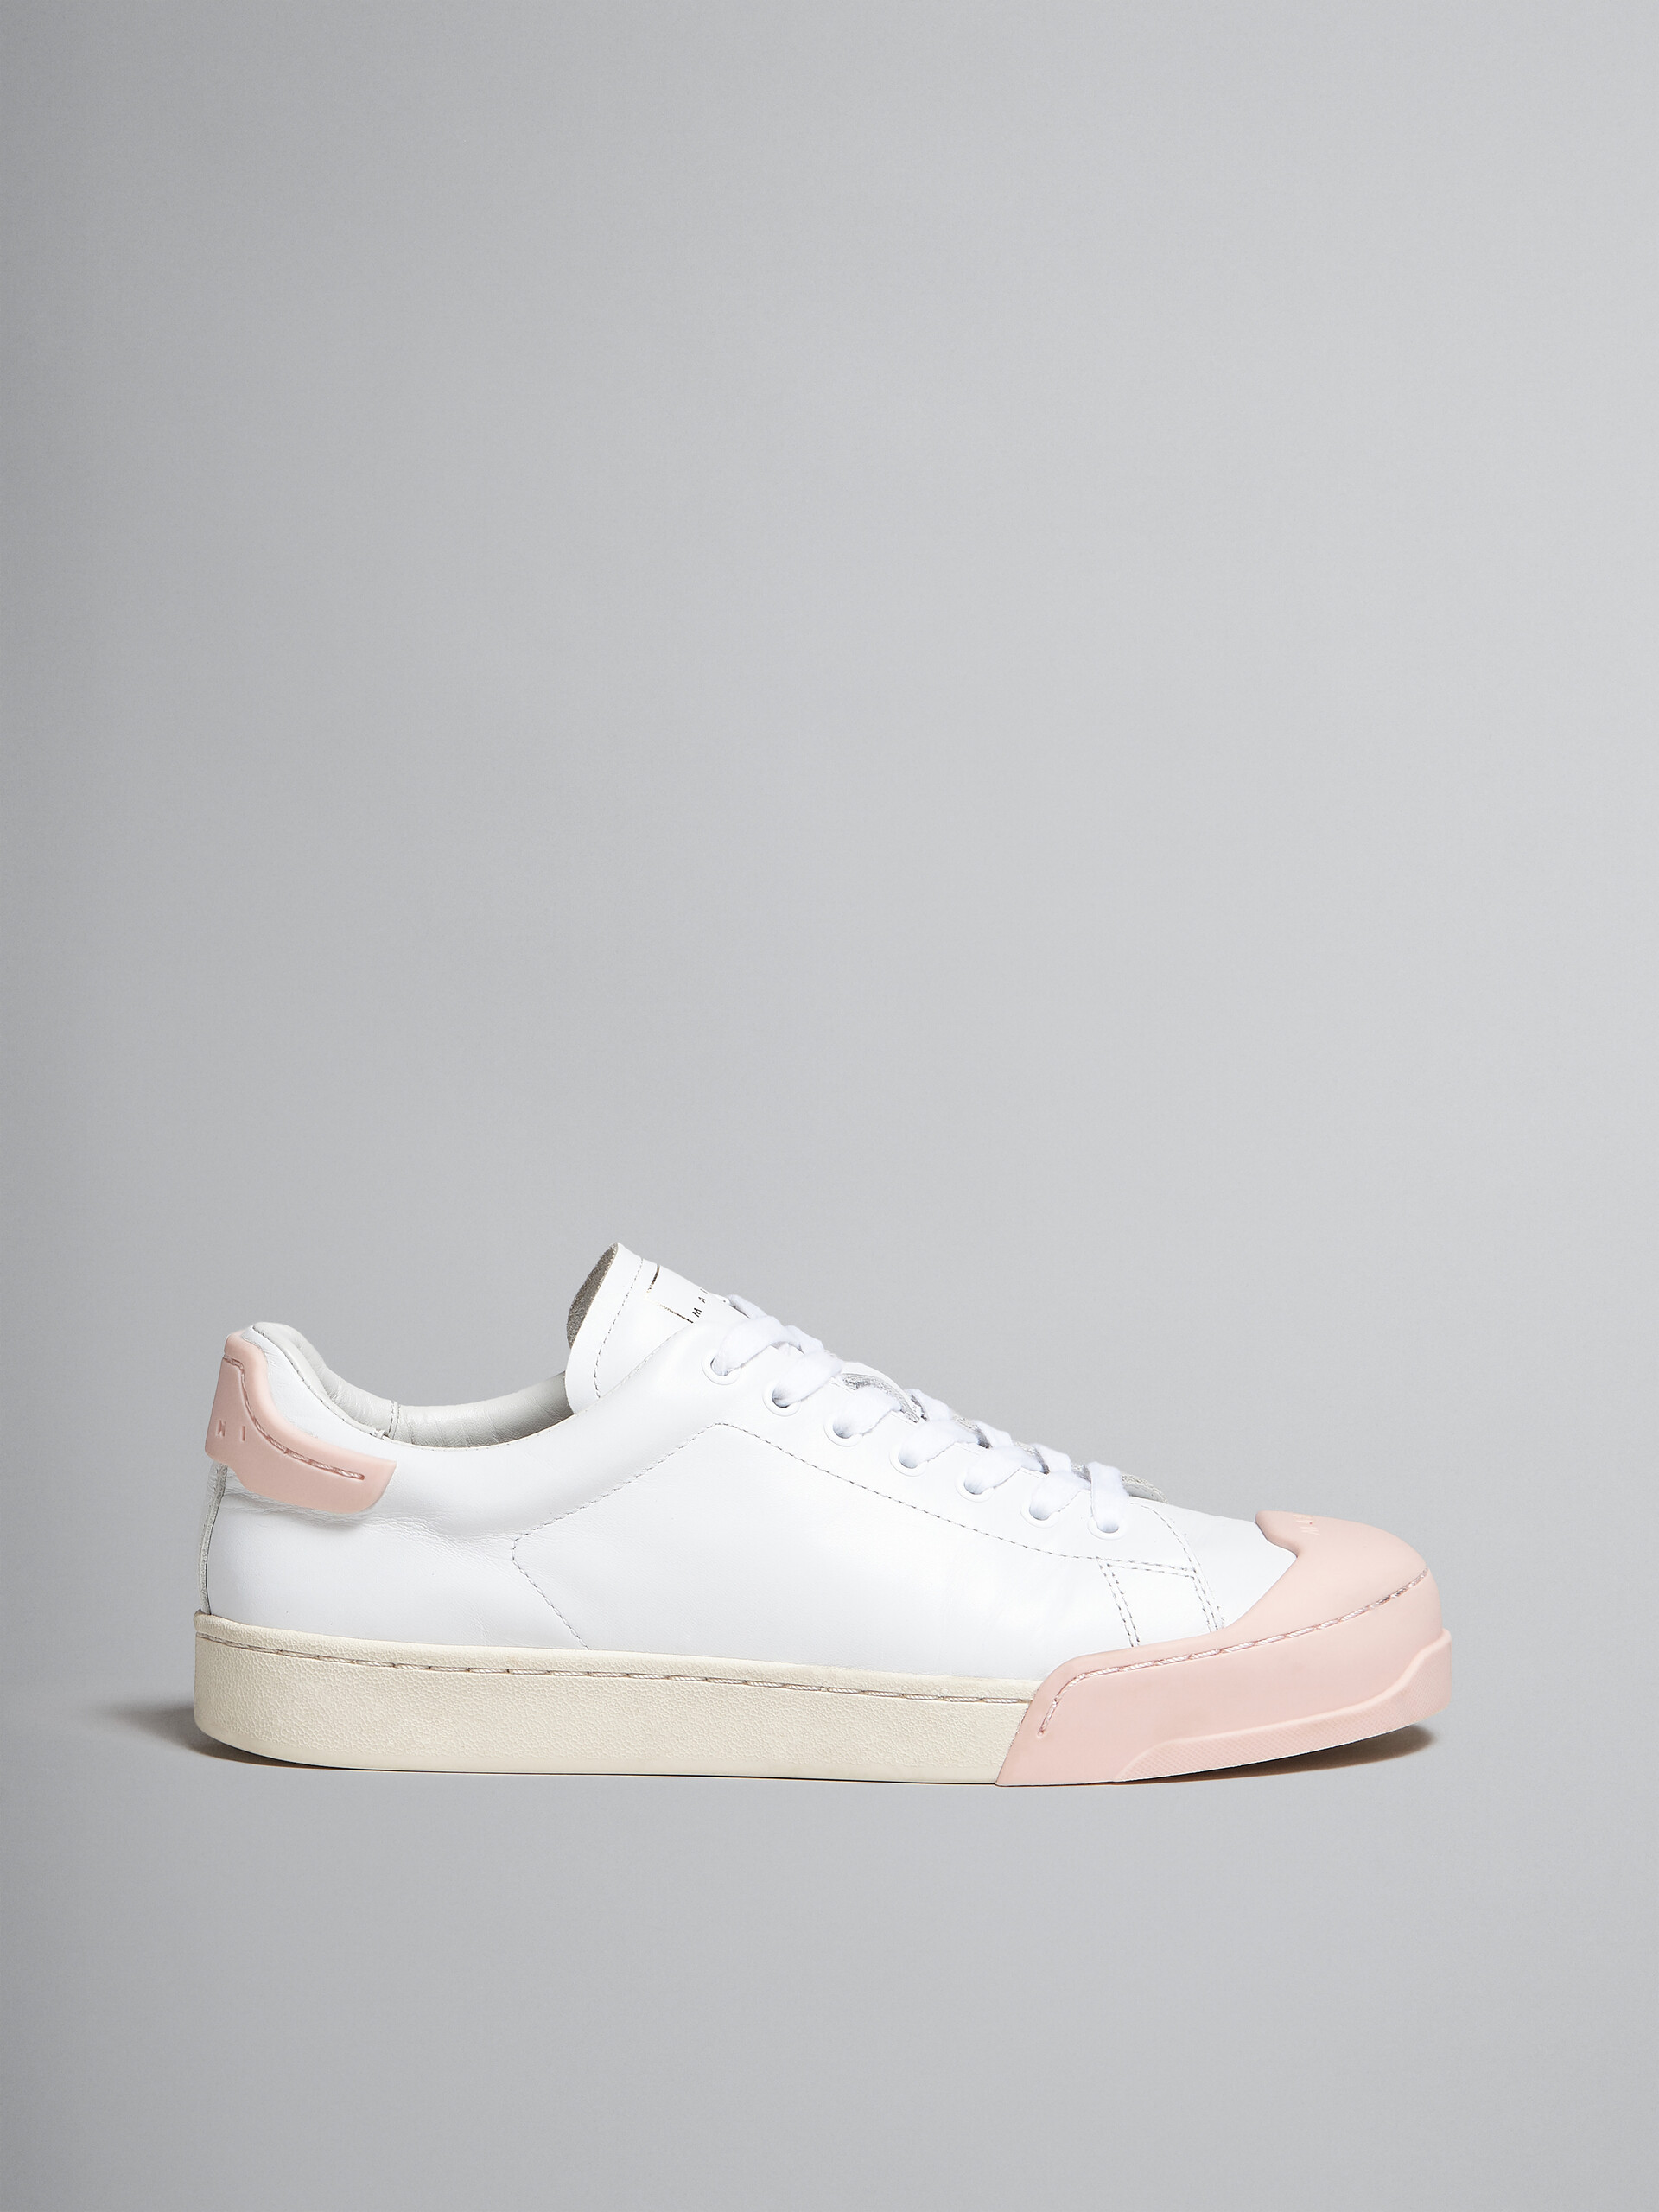 Dada Bumper sneaker in white and pink leather - Sneakers - Image 1